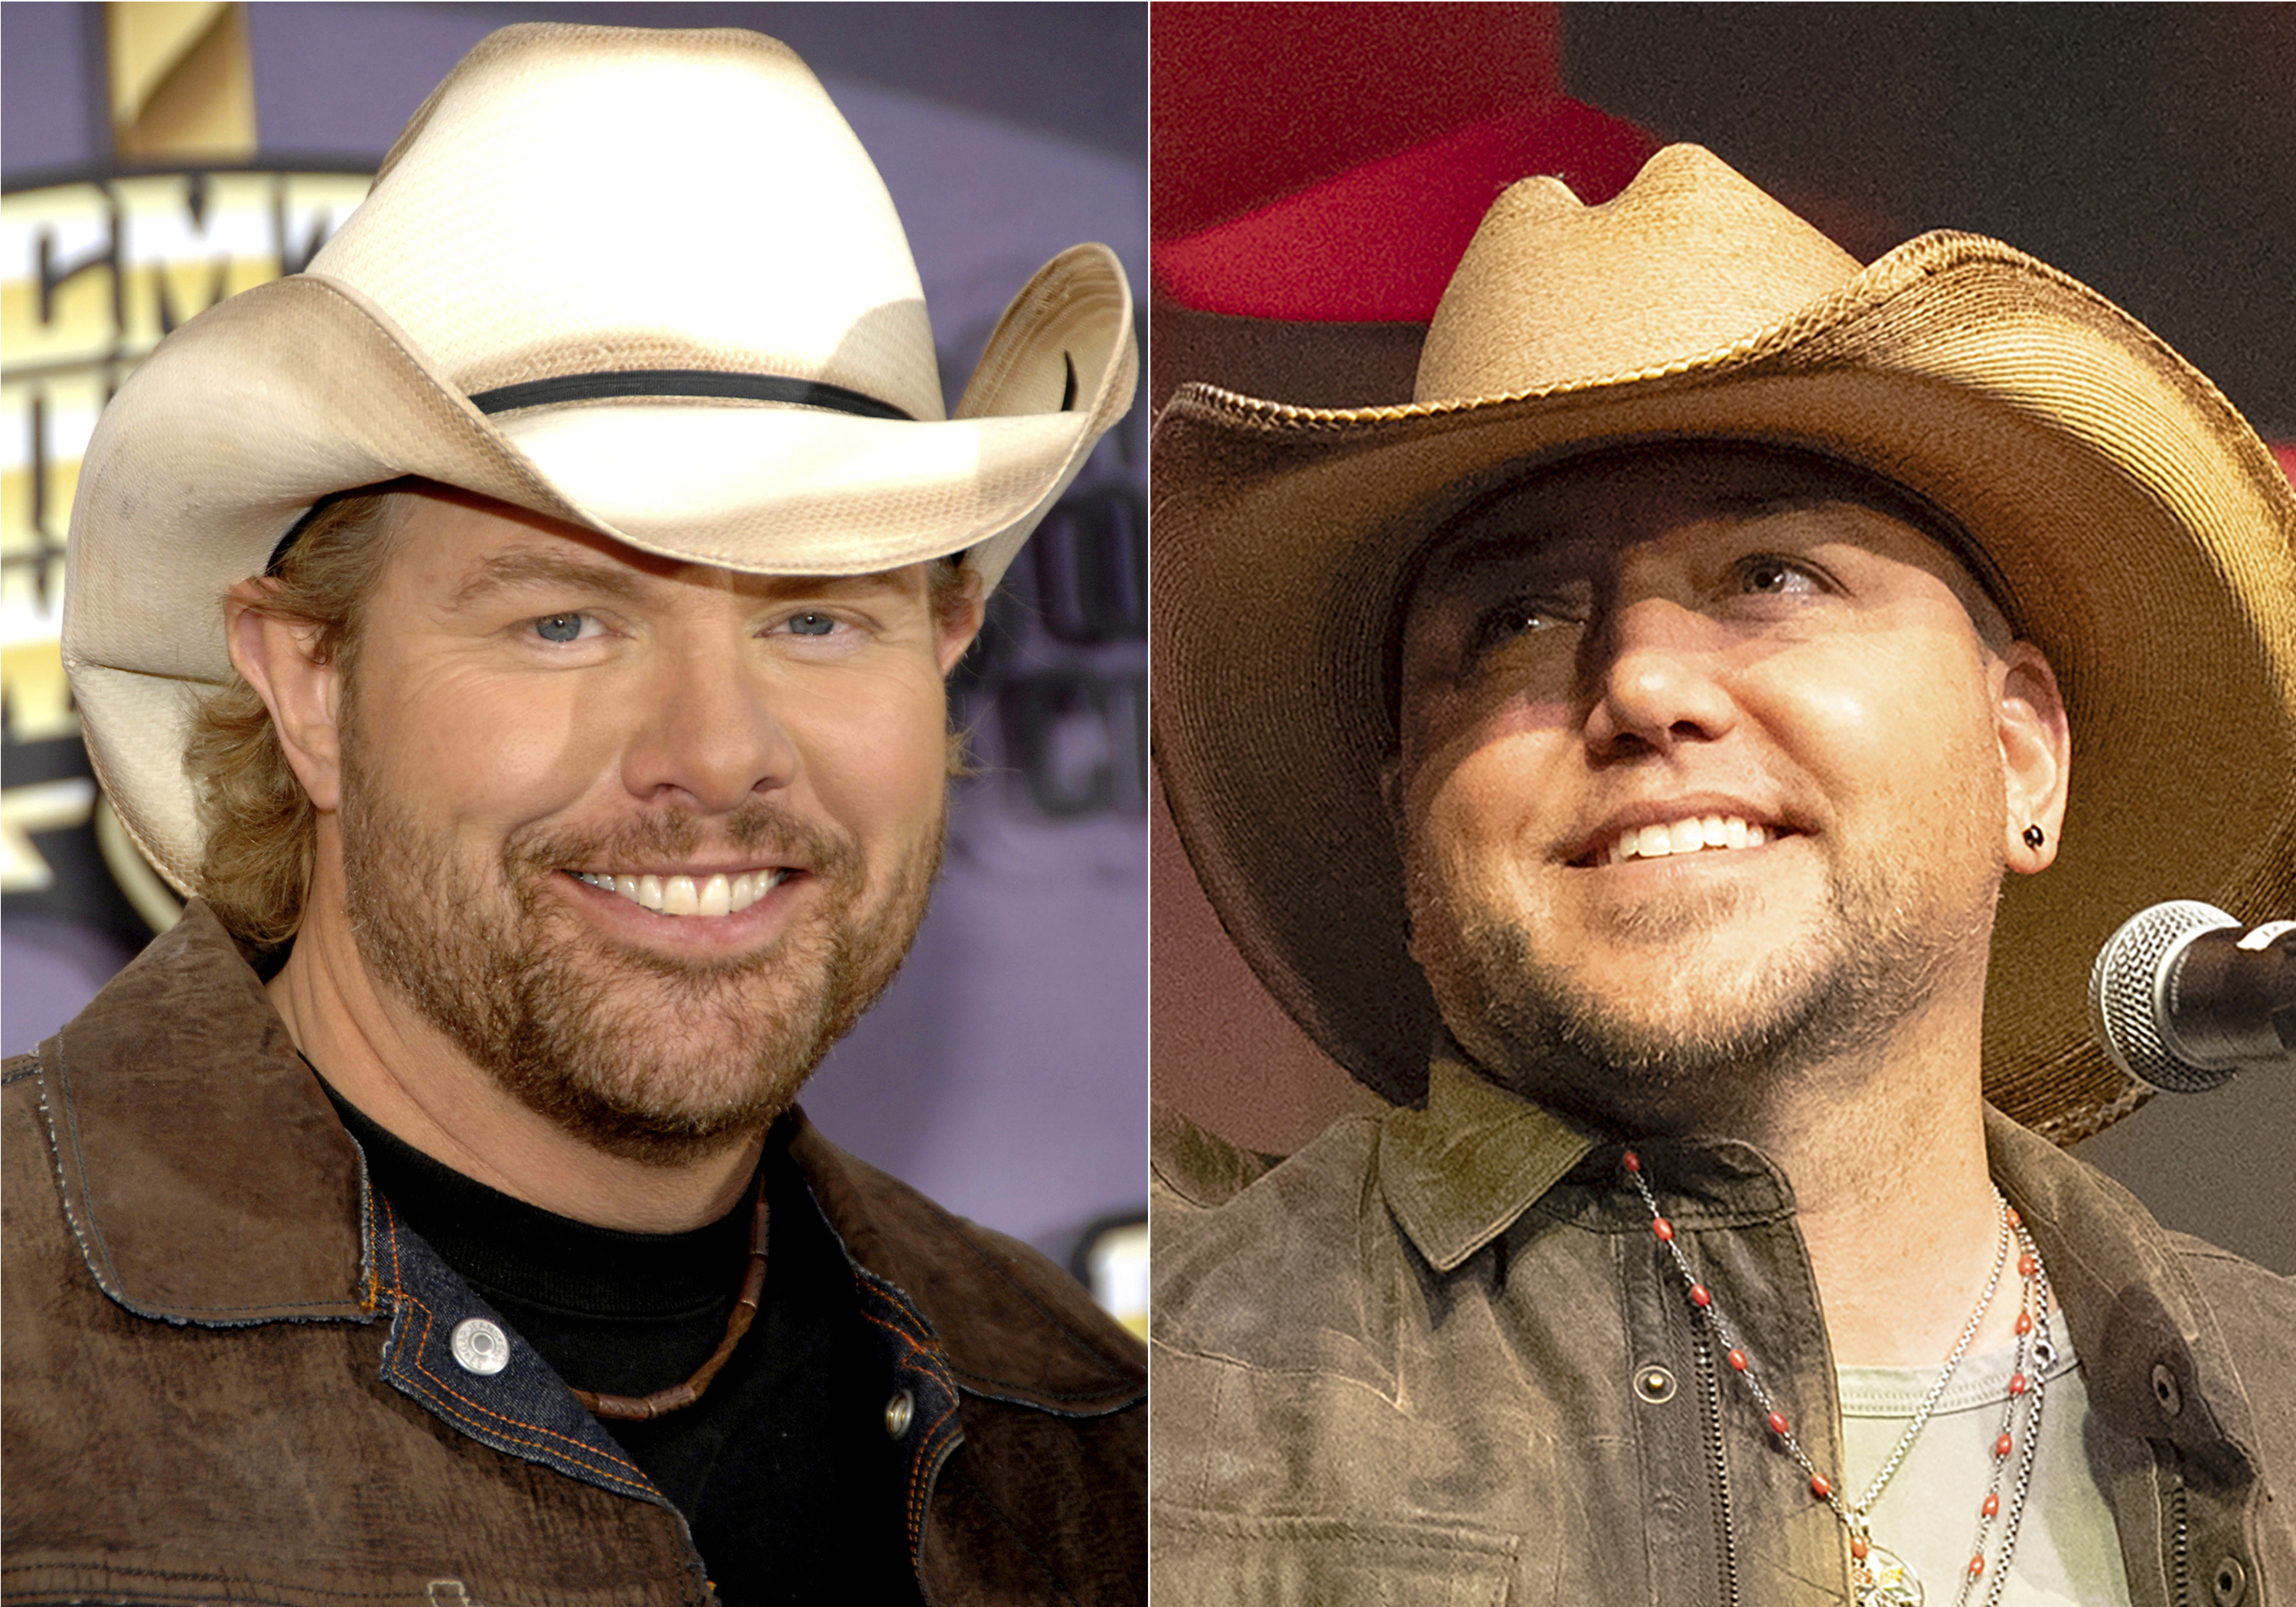 Toby Keith appears at the CMT Music Awards, in Nashville, Tenn., on April 14, 2008, left, and Jason Aldean appears at the Country Radio Seminar in Nashville, Tenn., on Feb. 29, 2024. (AP Photo)